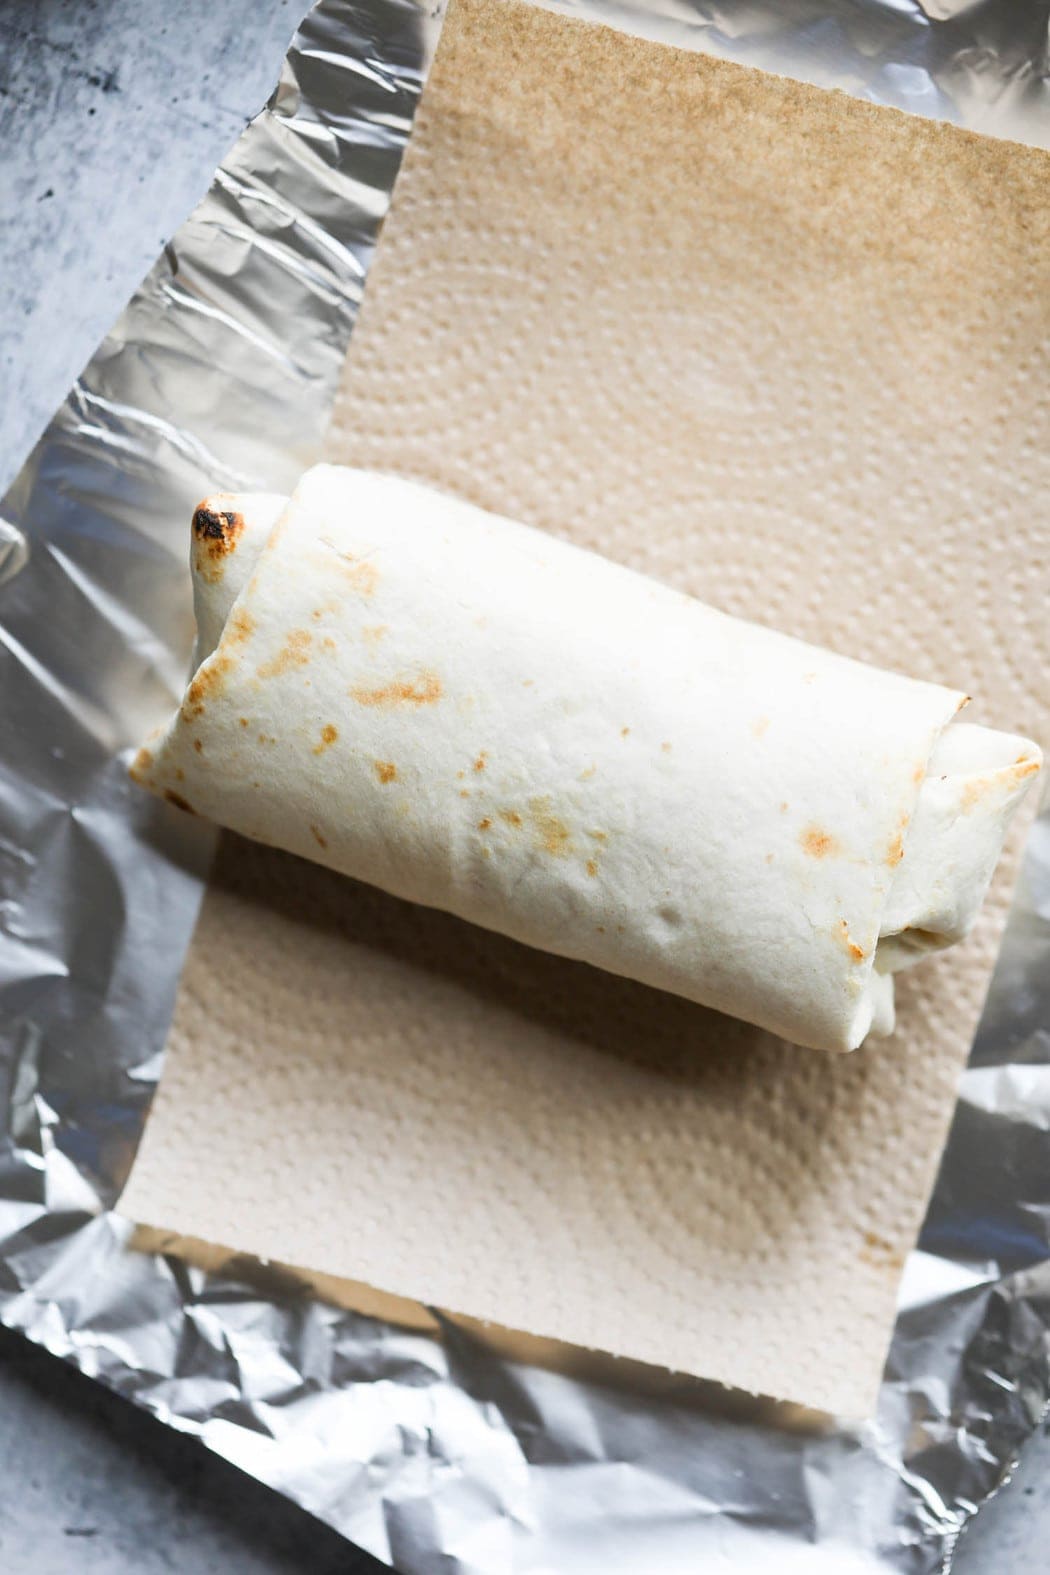 A breakfast burrito rolled up placed on a paper towel and piece of foil